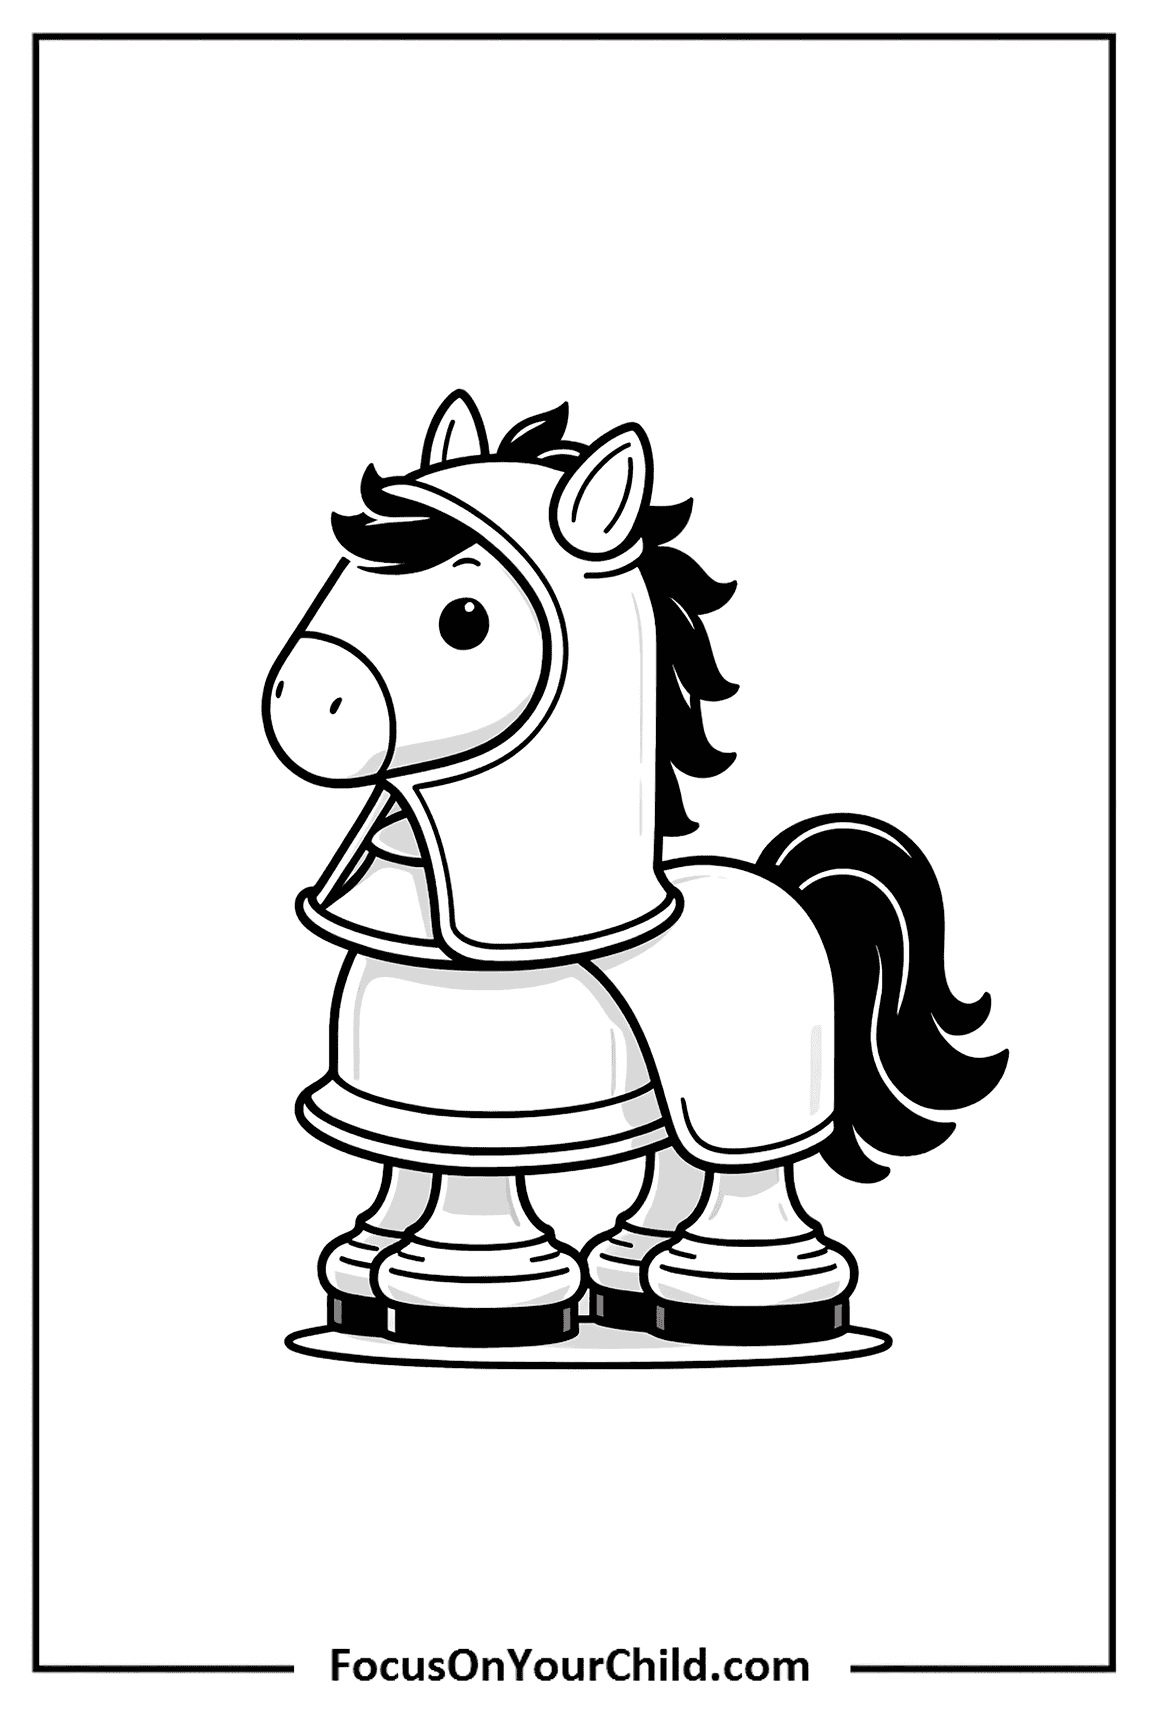 Chess knight horse illustration for childrens coloring activities at FocusOnYourChild.com.